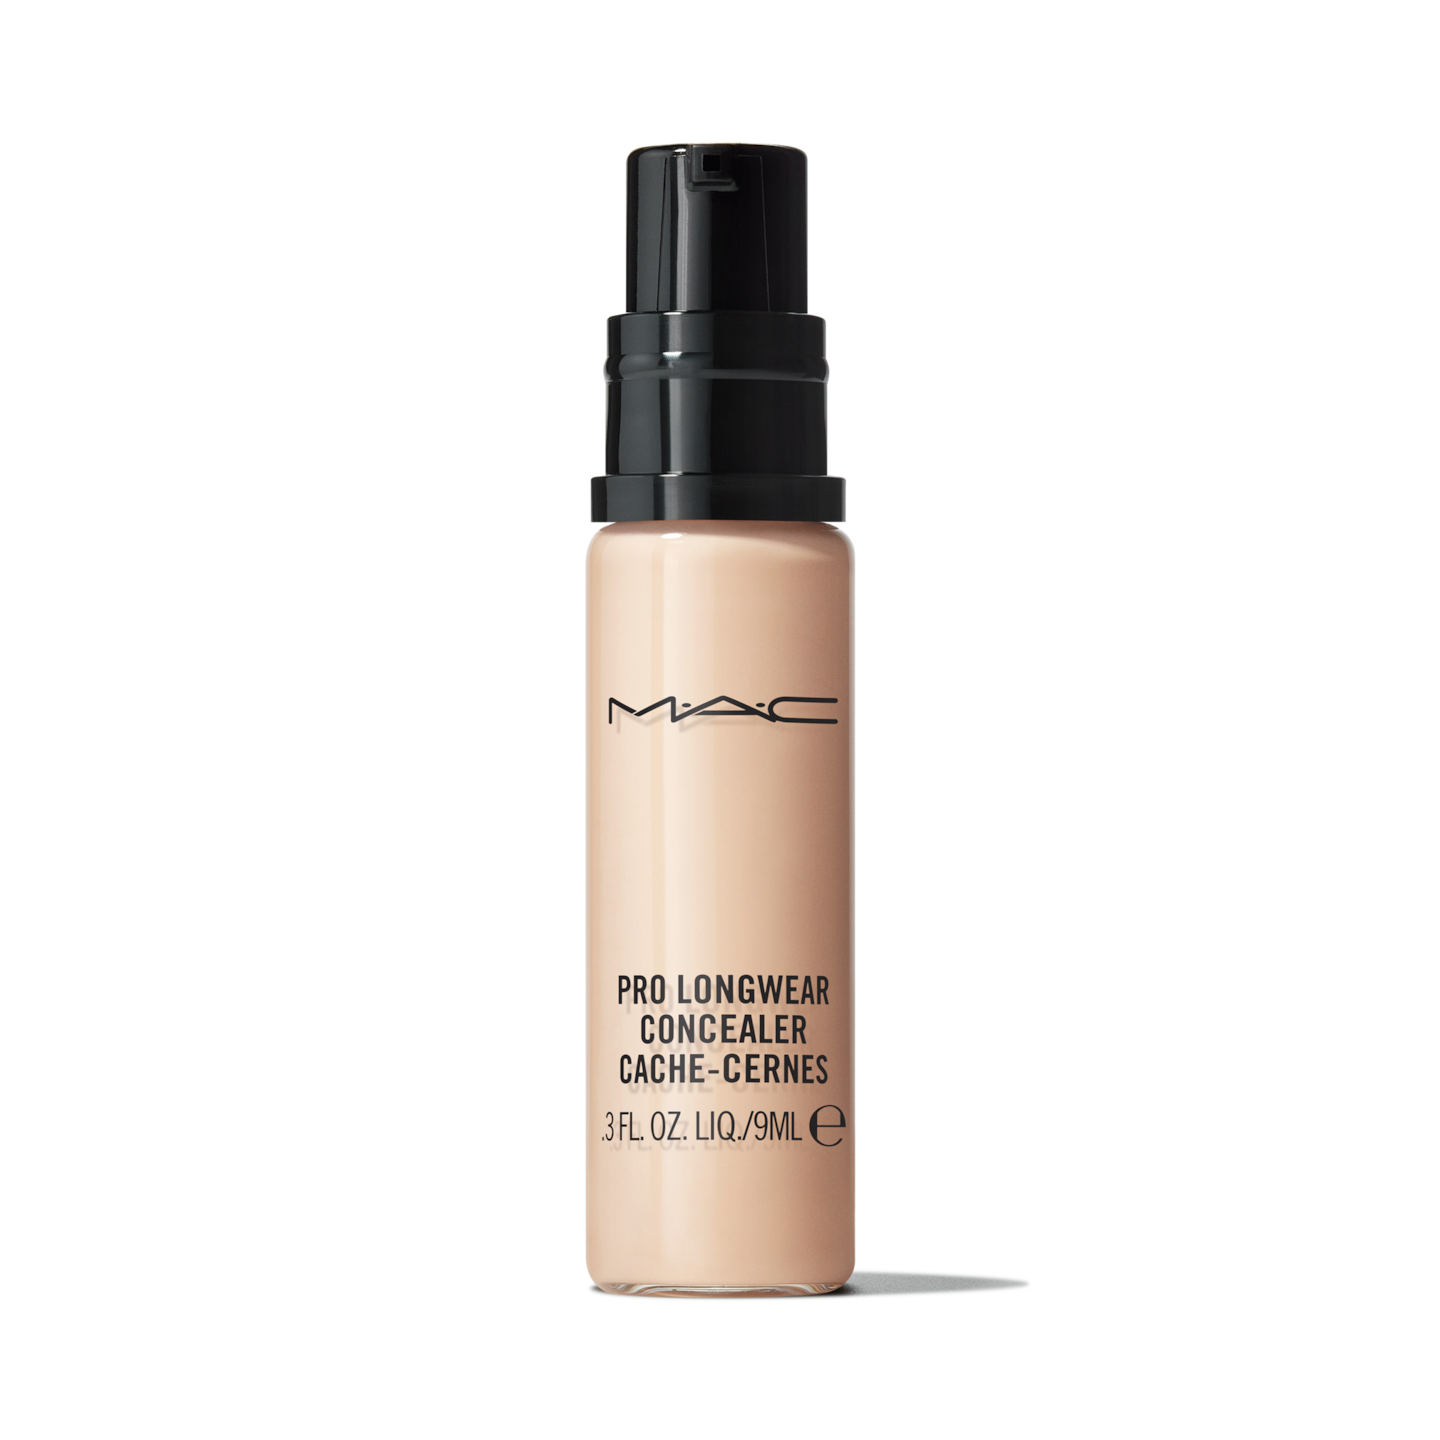 Pro Longwear Concealer Full Coverage | Cosmetics Official Site